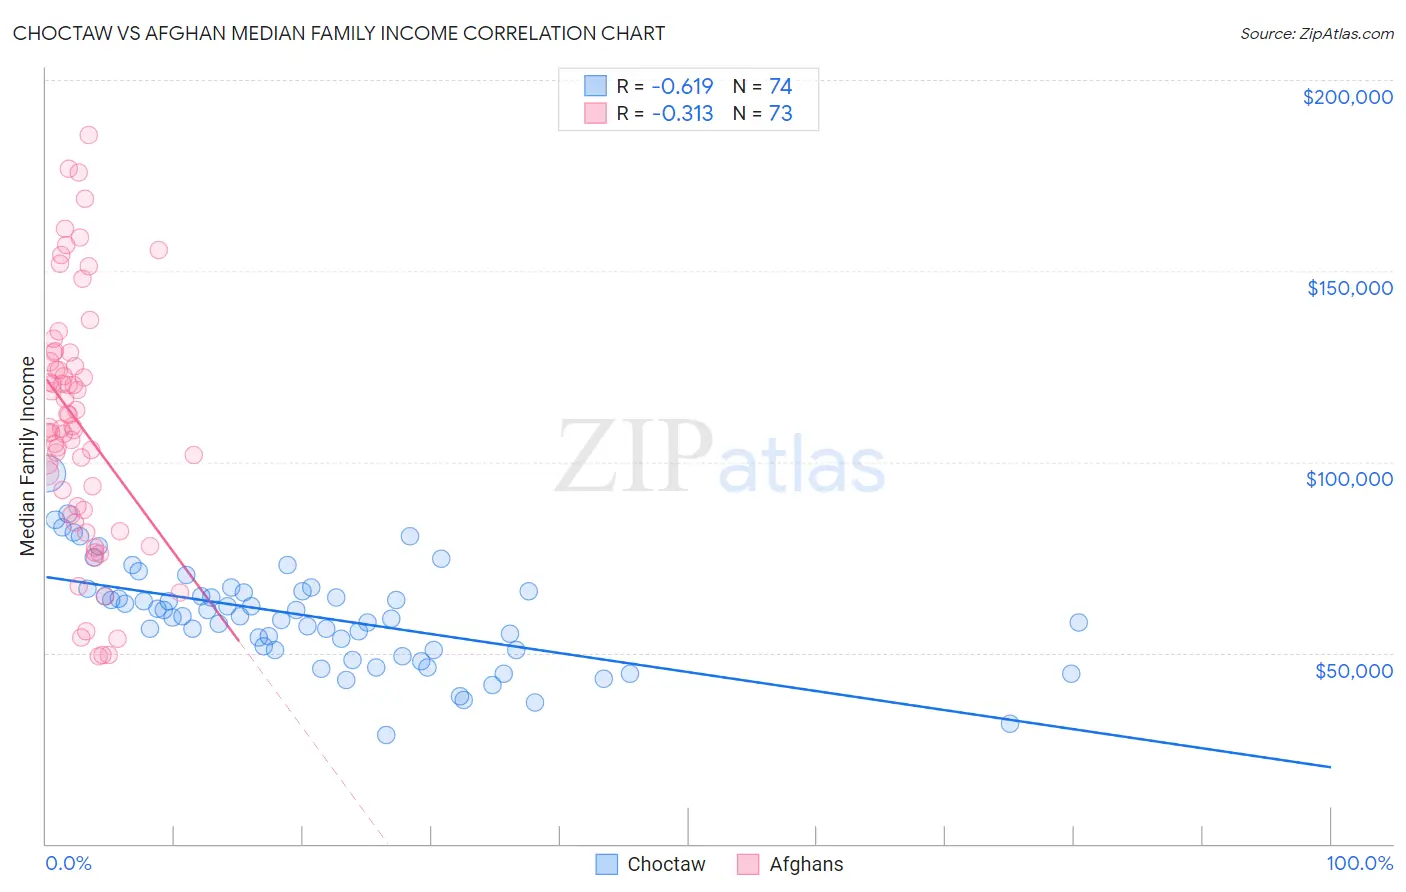 Choctaw vs Afghan Median Family Income